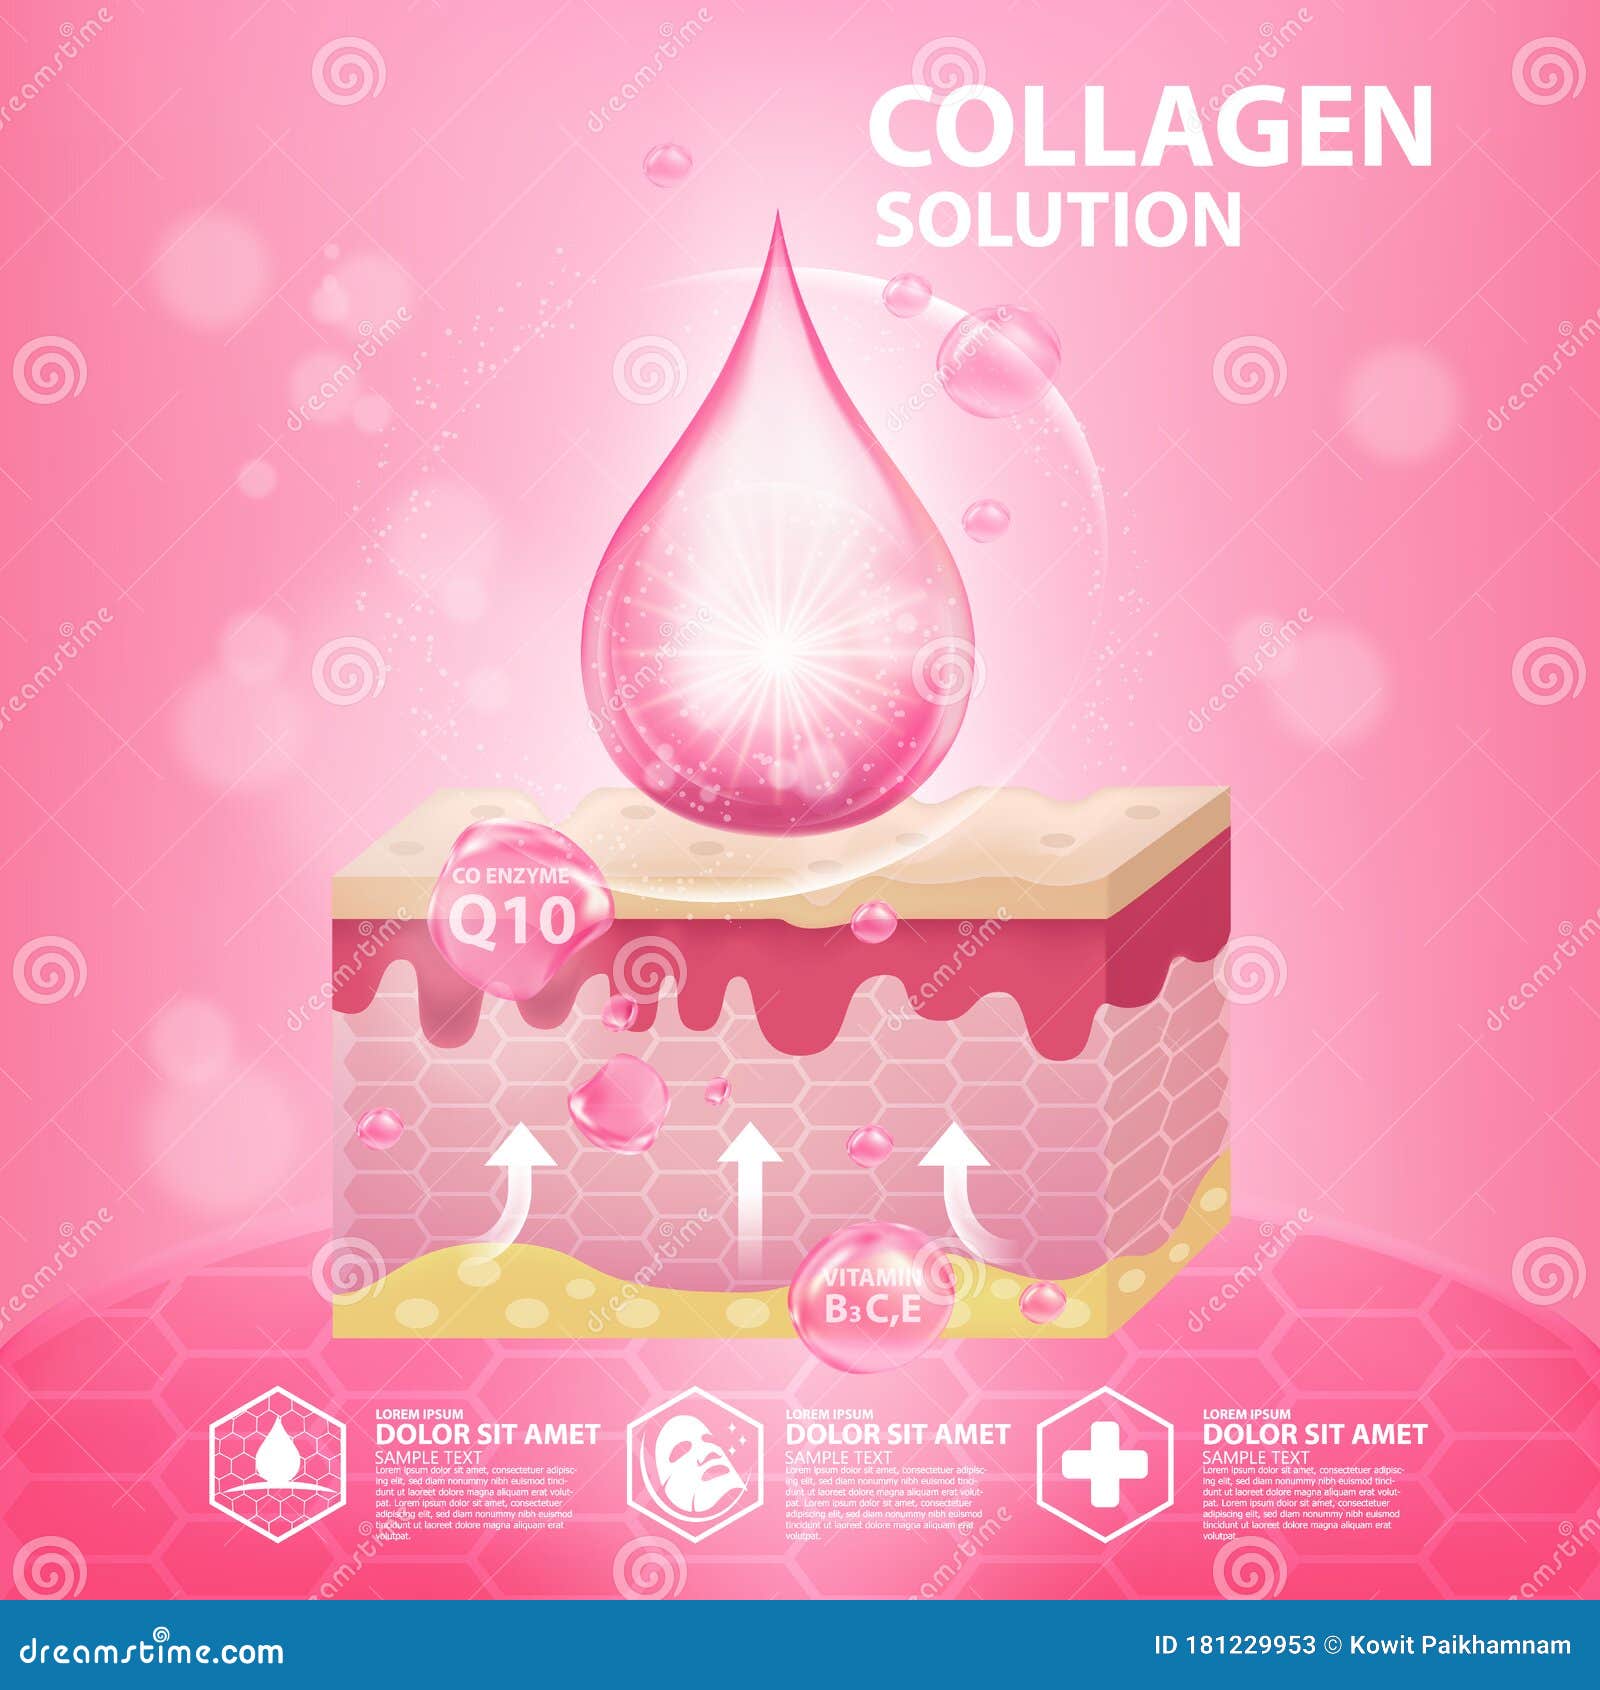 Collagen Solution Skin Care Cosmetic Vector Illustration Stock Vector Illustration Of Clear Poster